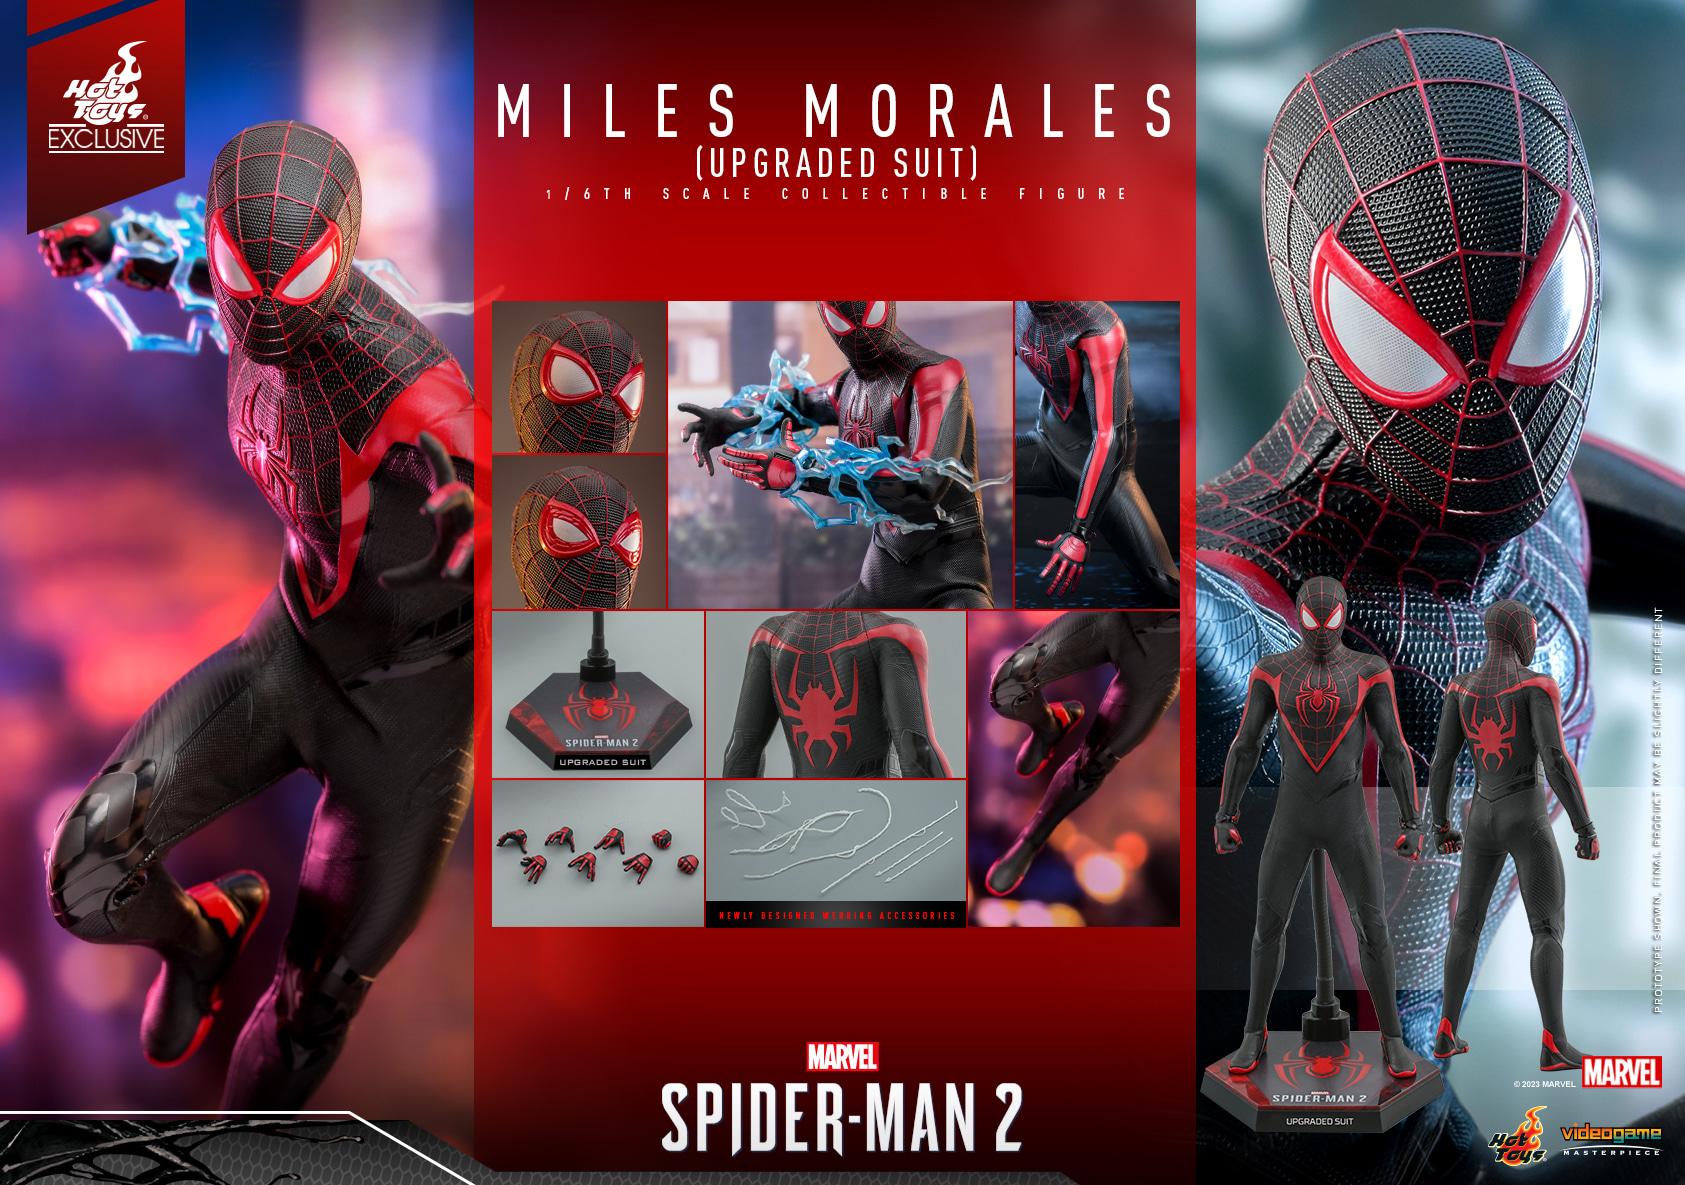 Hot Toys SPIDER-MAN Upgraded Suit Review BR / DiegoHDM 